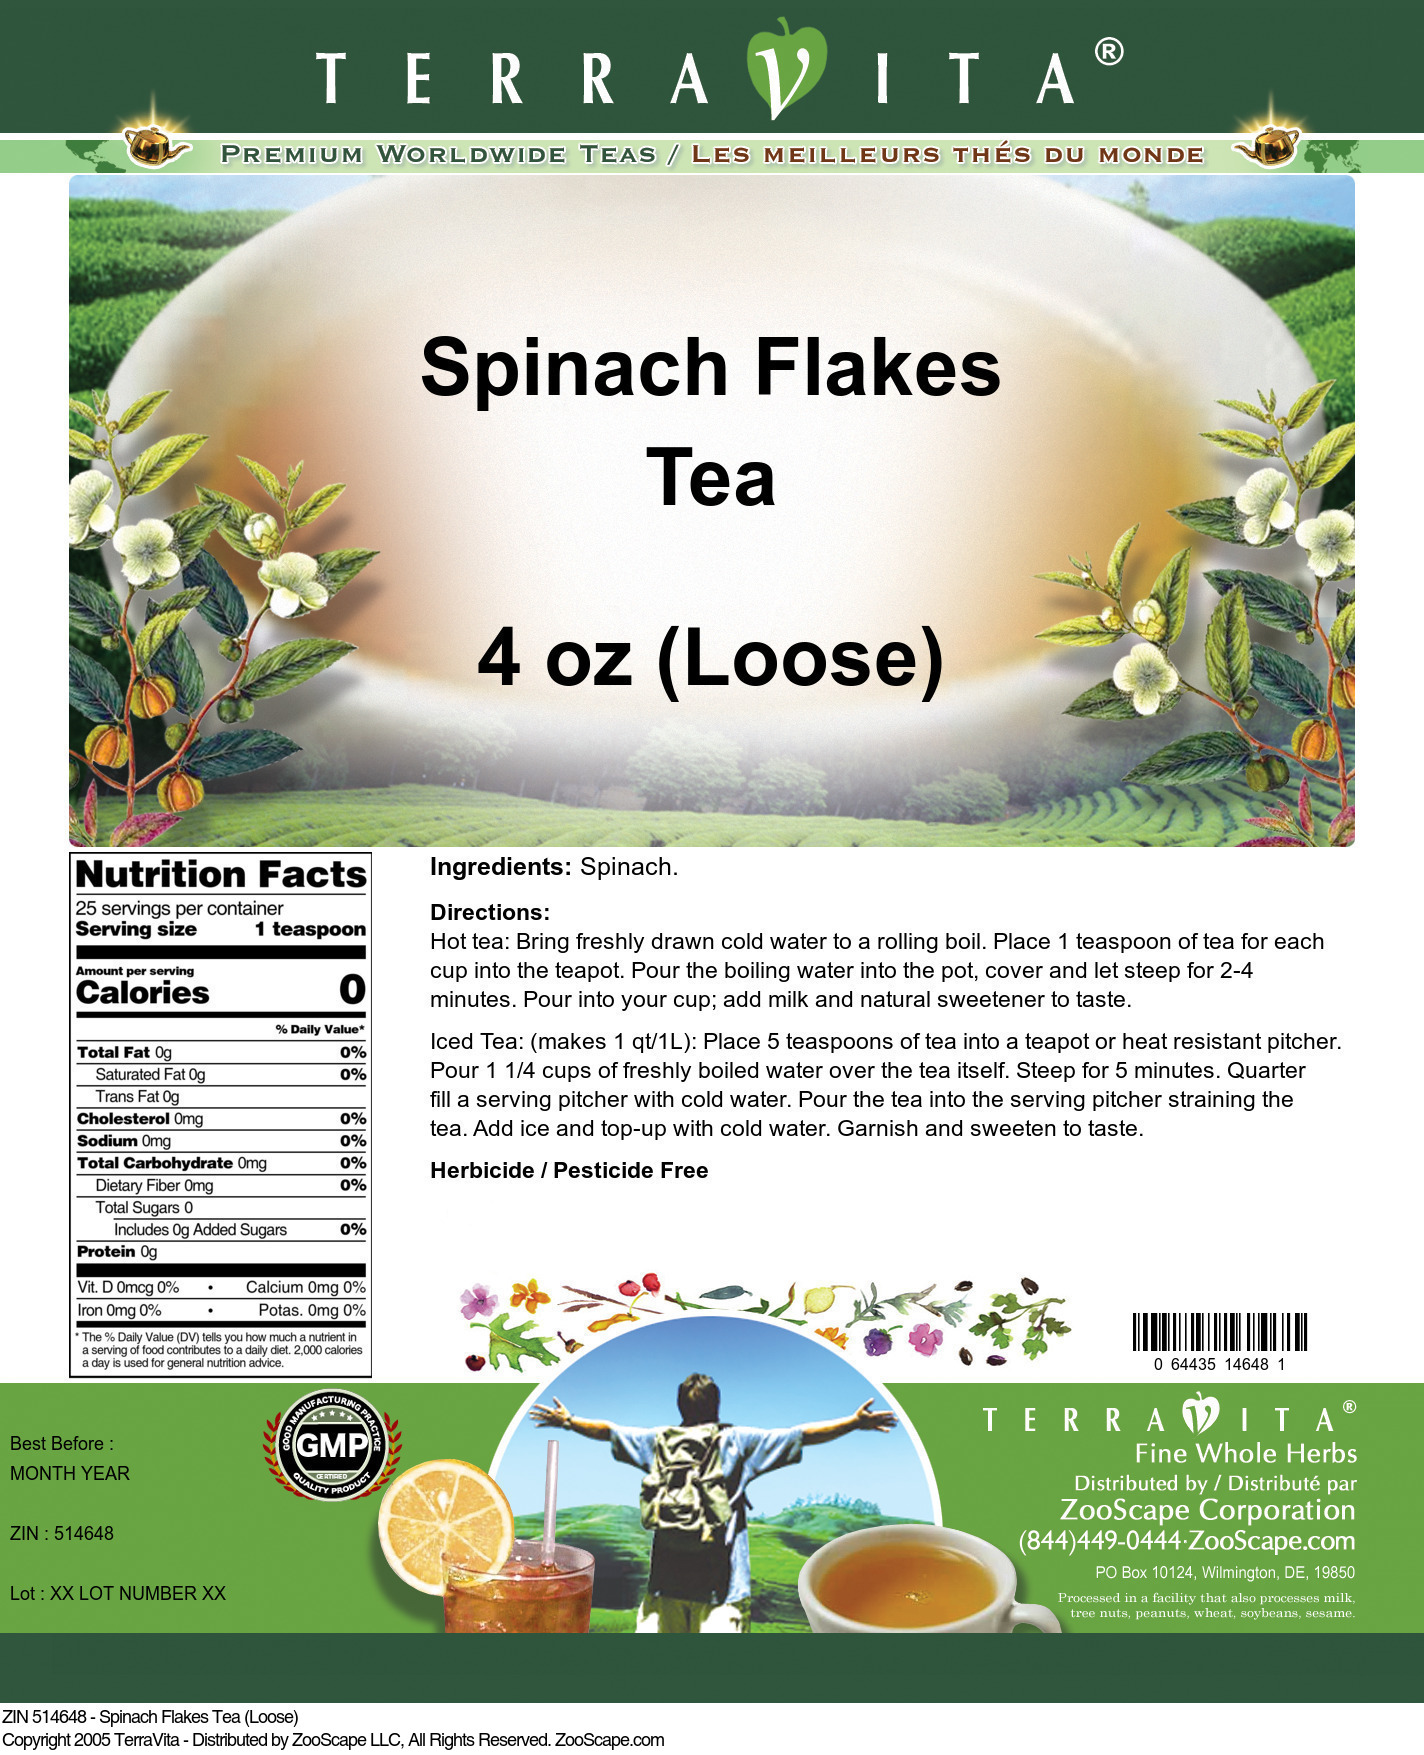 Spinach Flakes Tea (Loose) - Label